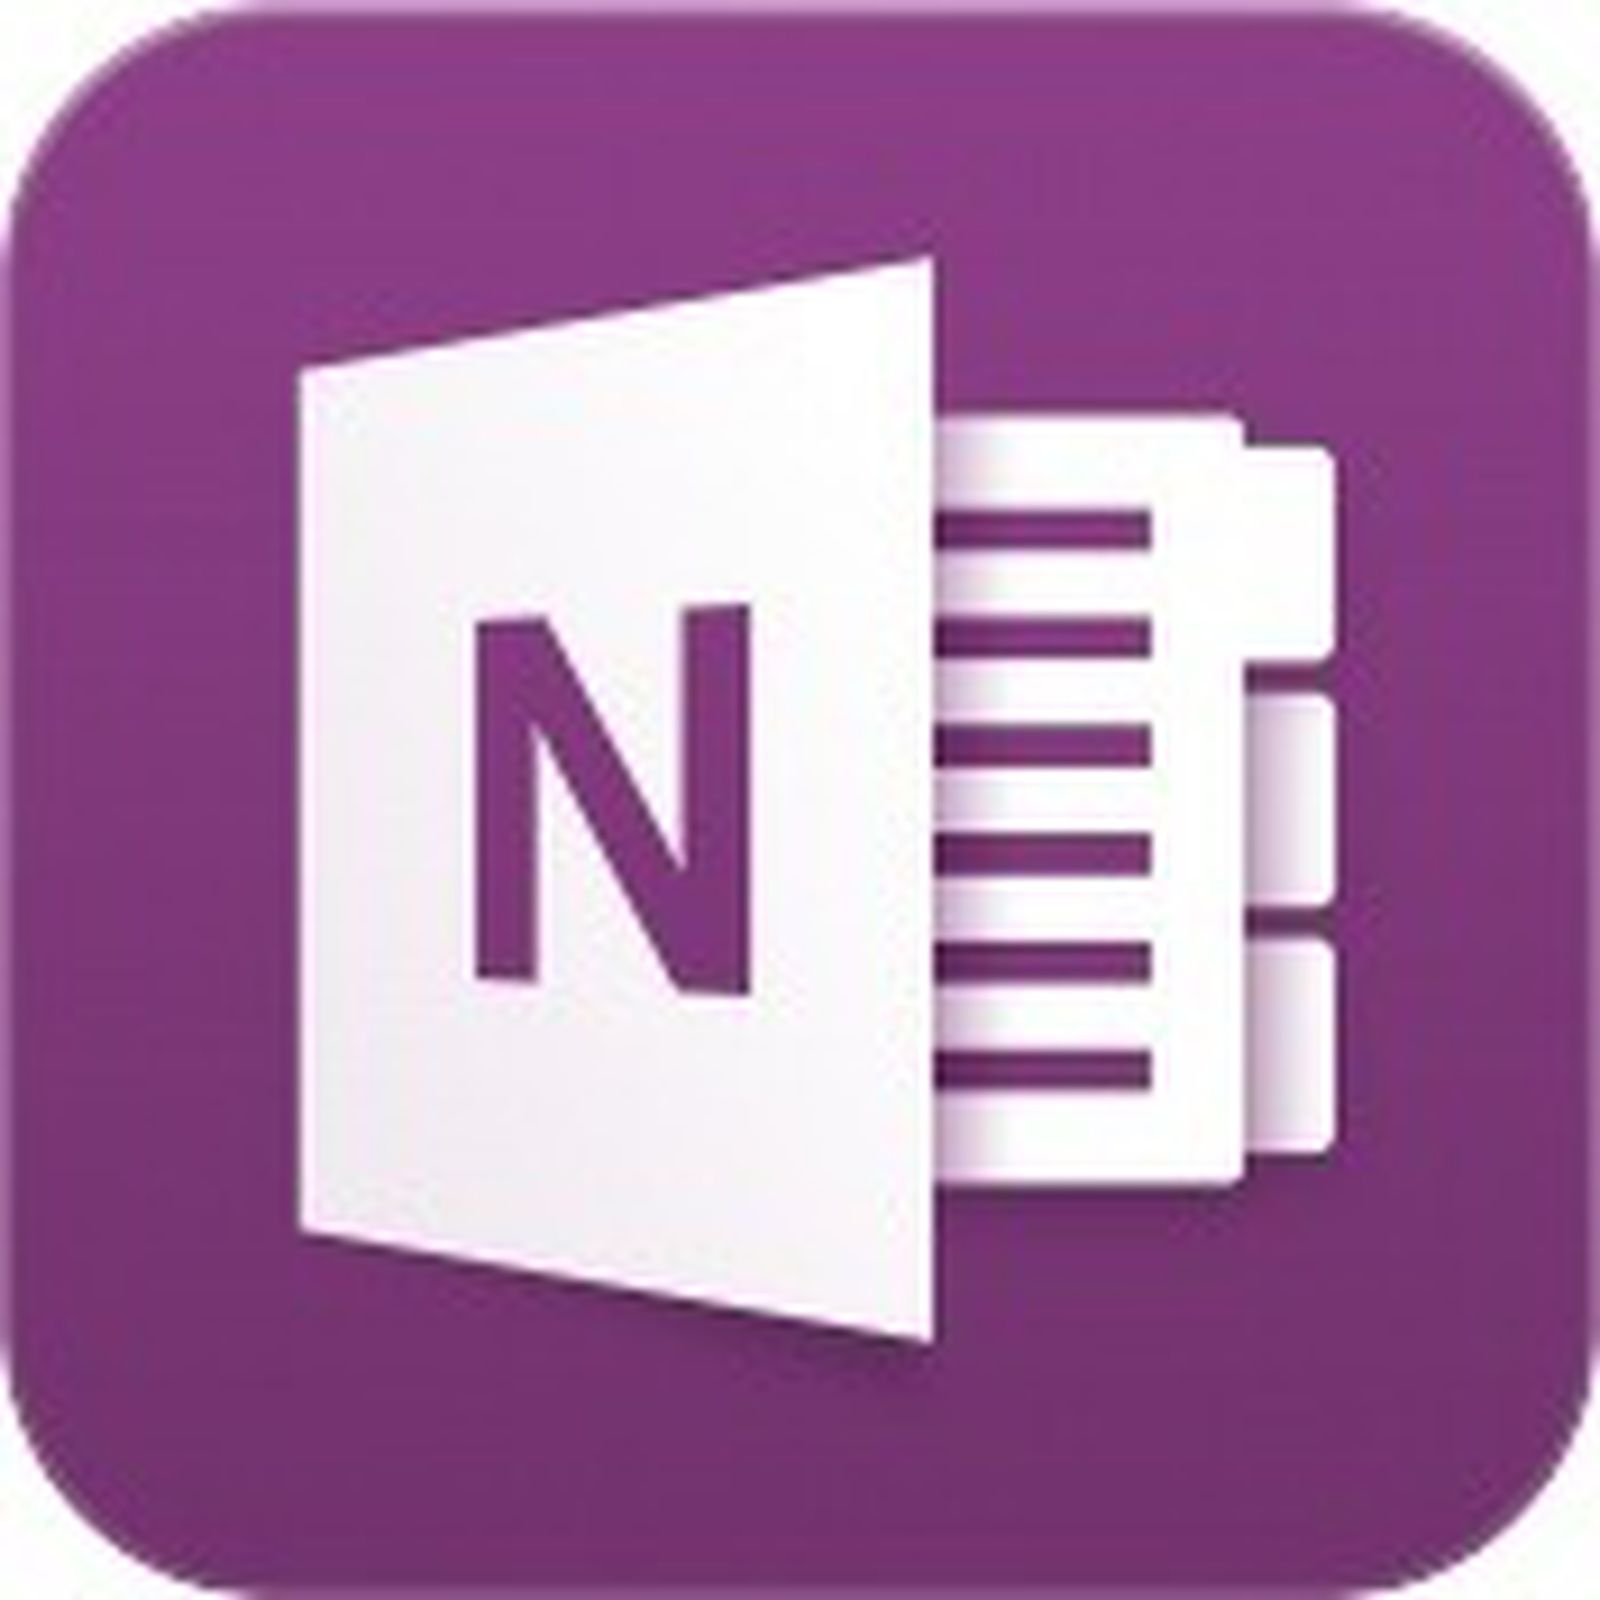 how to delete onenote notebook on iphone